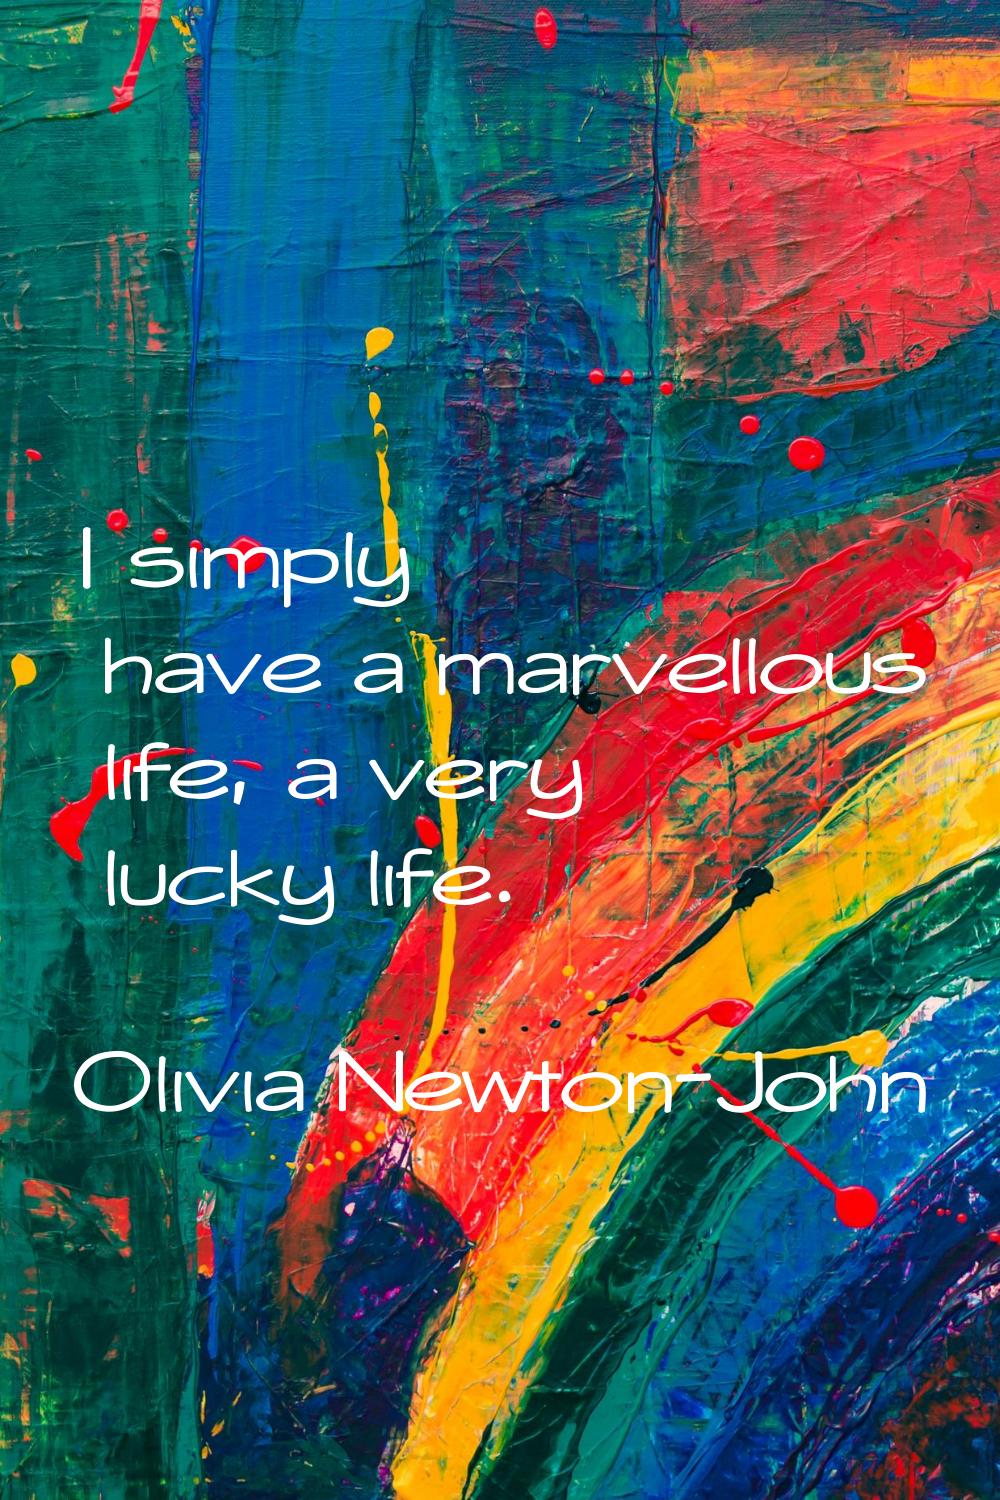 I simply have a marvellous life, a very lucky life.